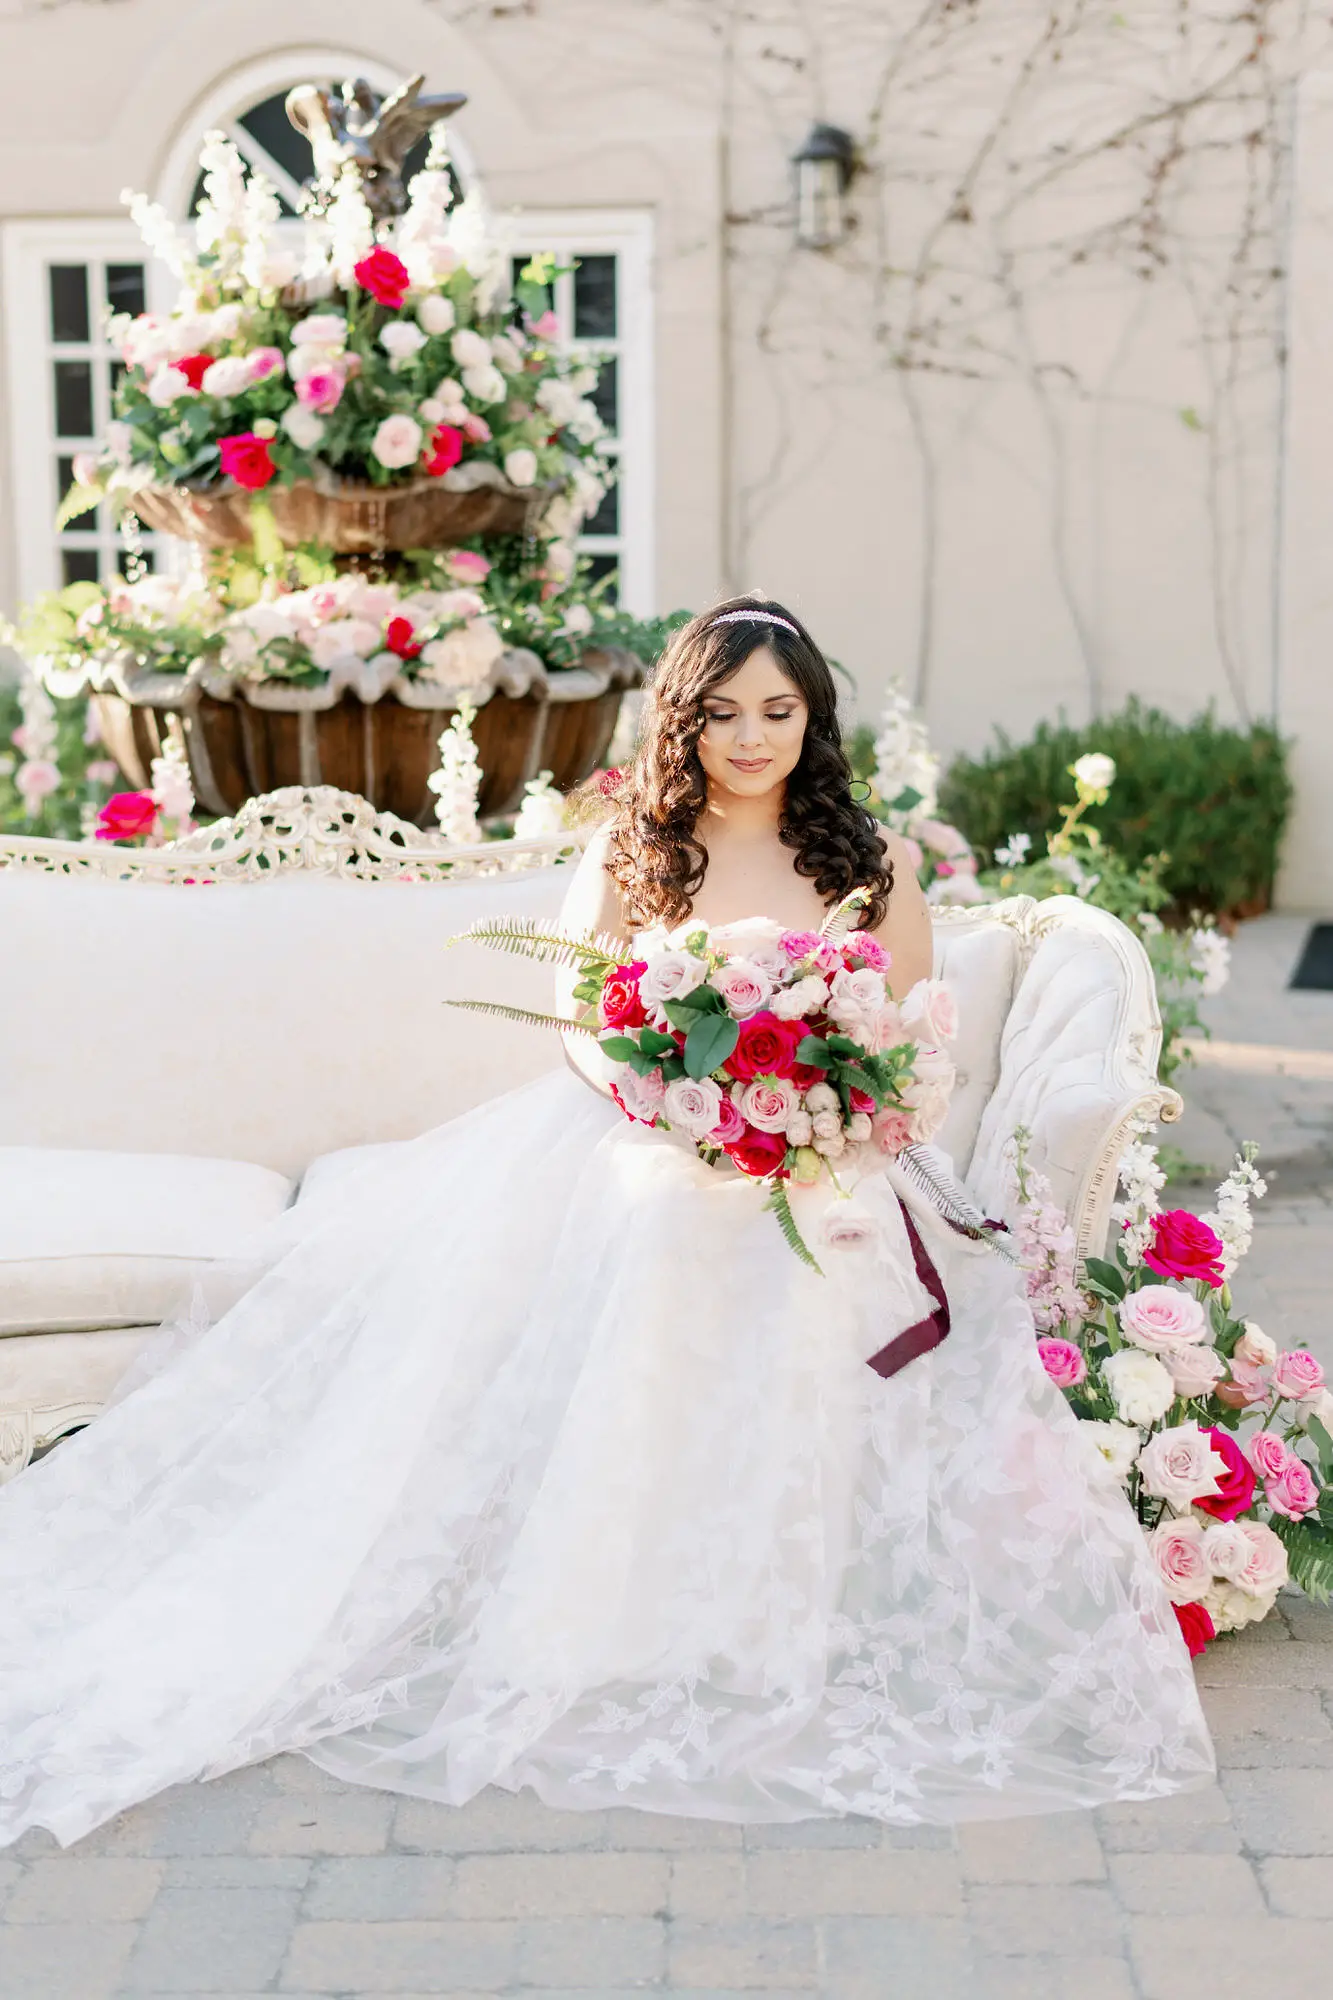 Outdoor Wedding reception decor with pink roses - Peony Park Photography